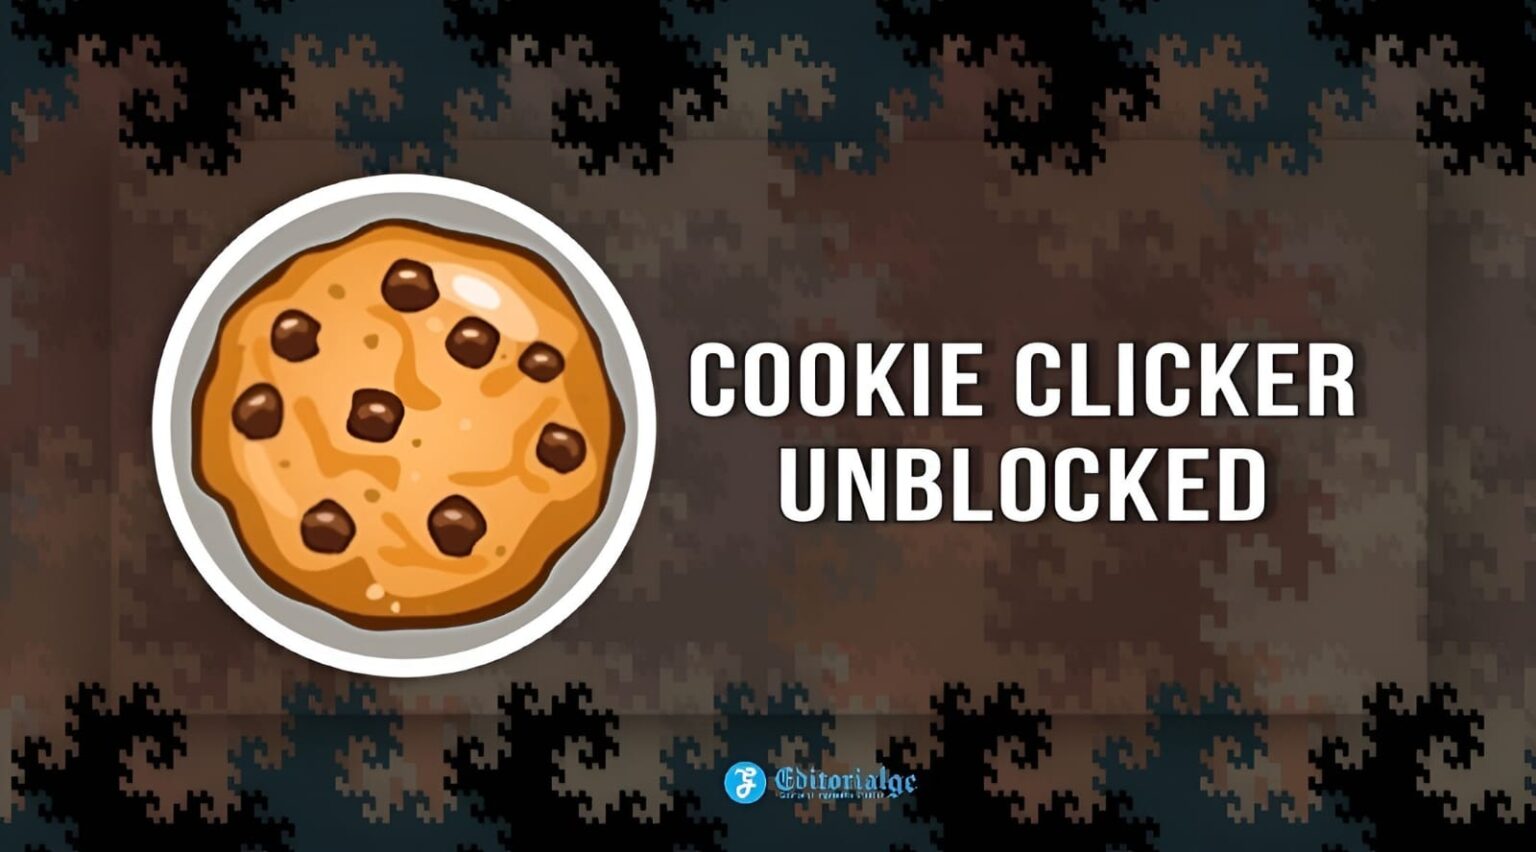 Cookie Clicker Unblocked How to Play and Win The Game?